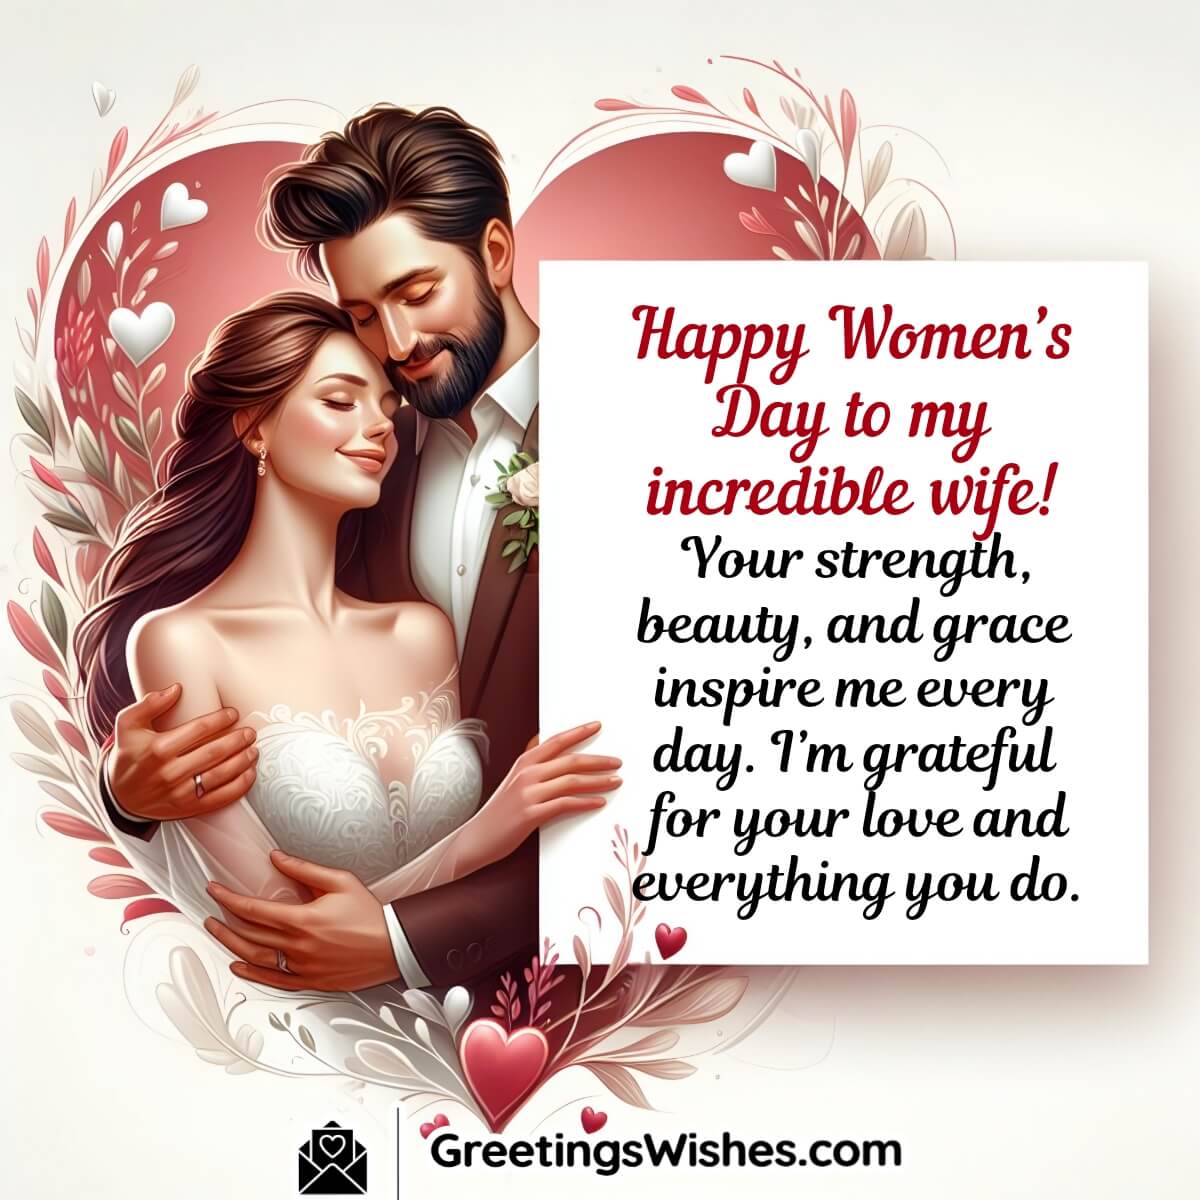 Women’s Day Wishes For Wife